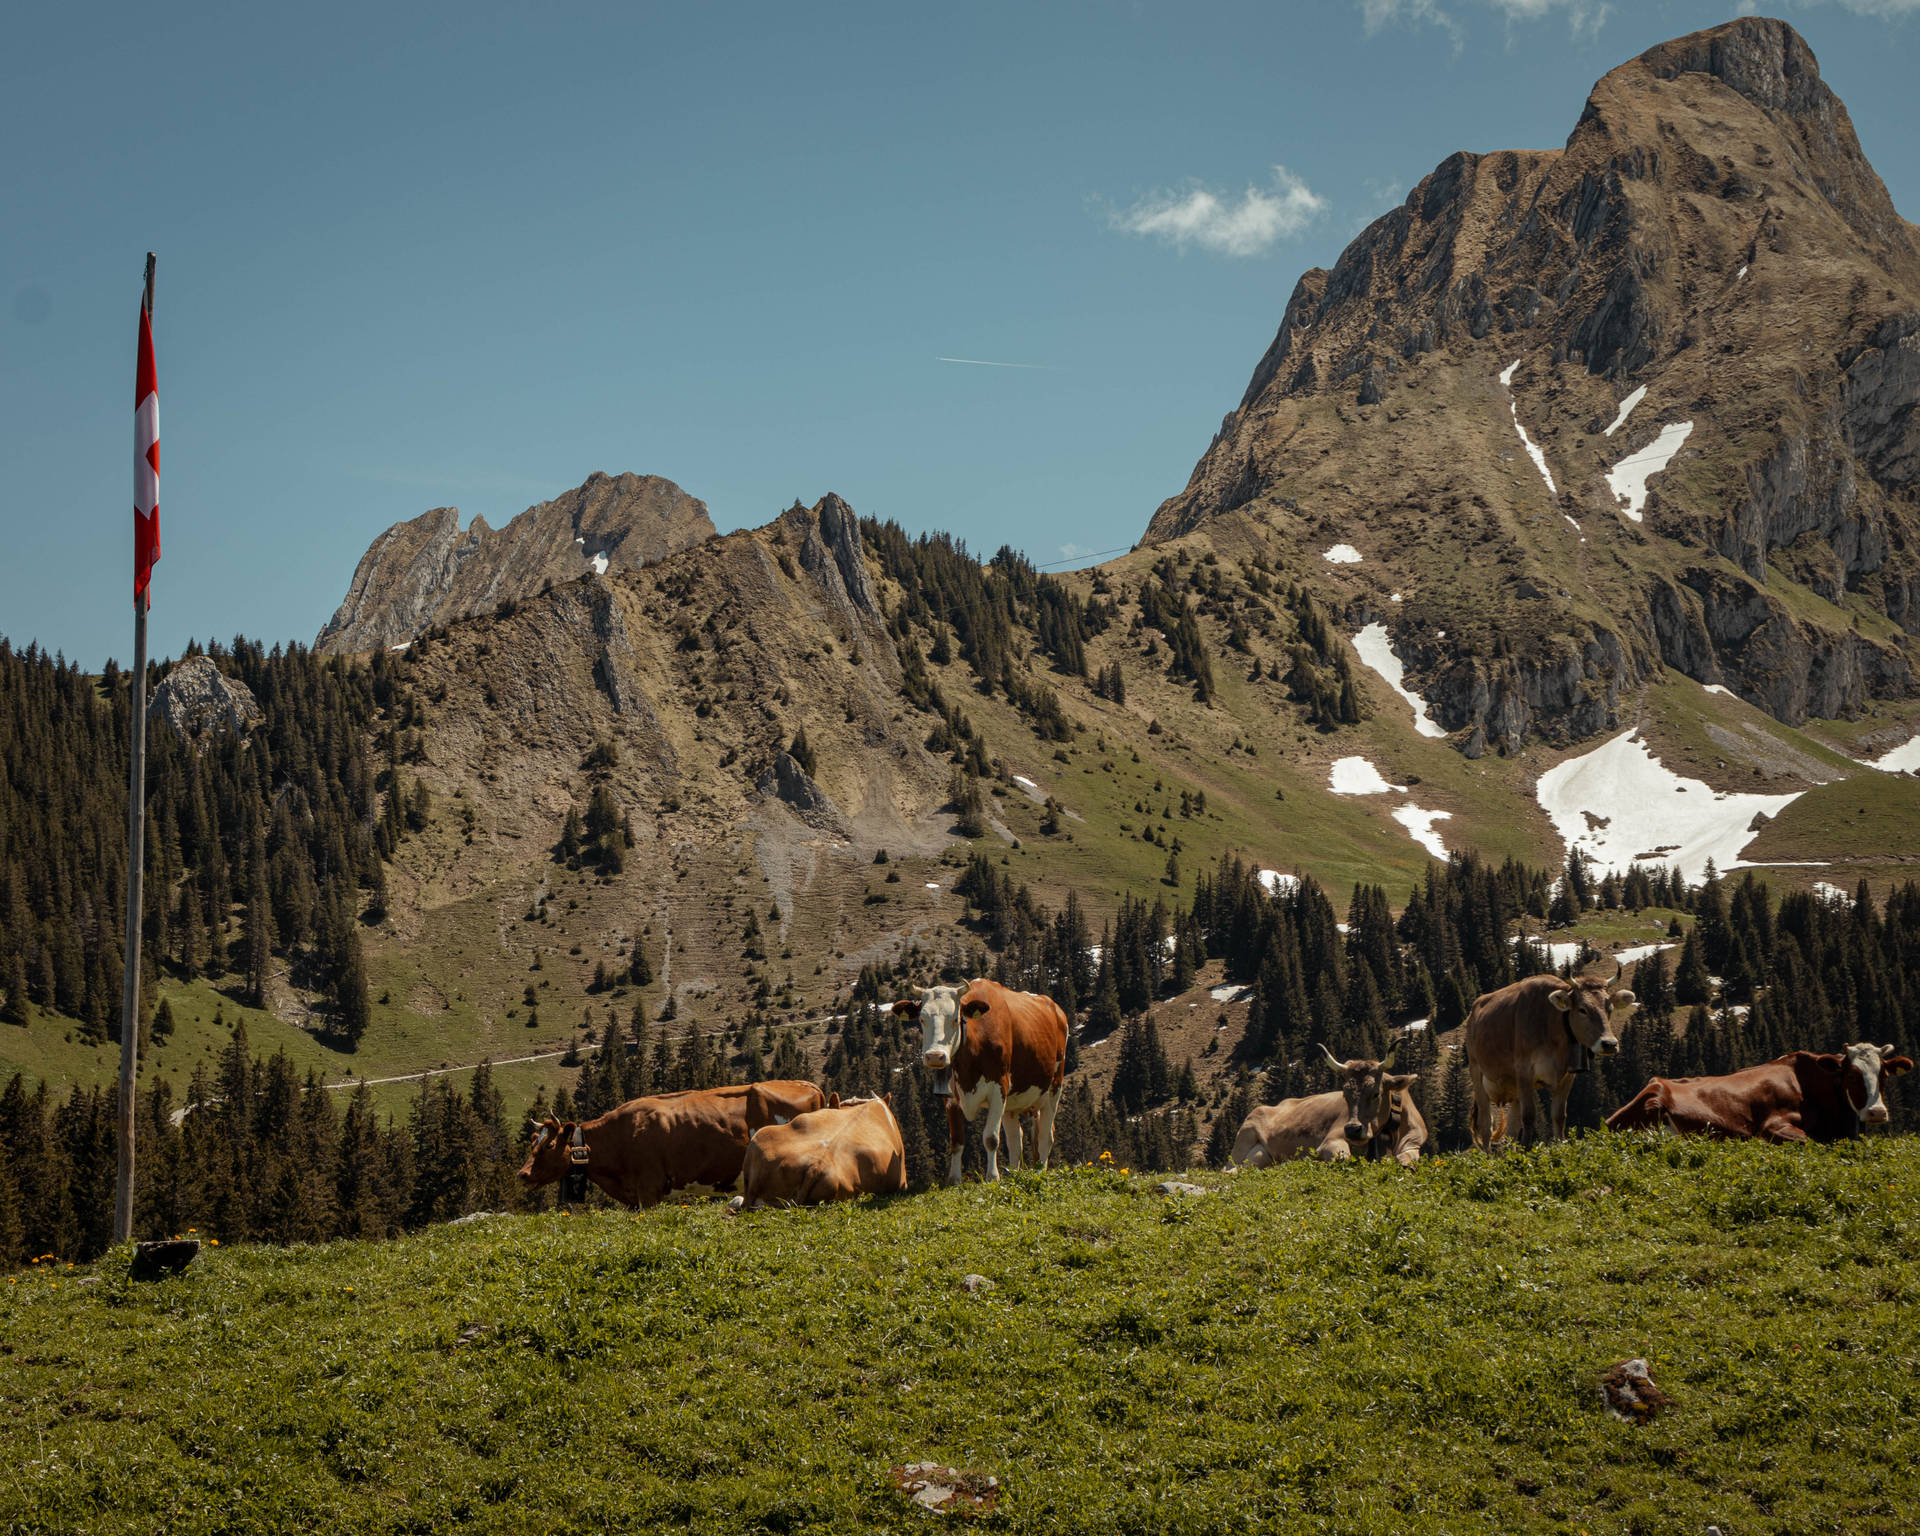 Cute Cows On Grass With Snowy Mountain Background